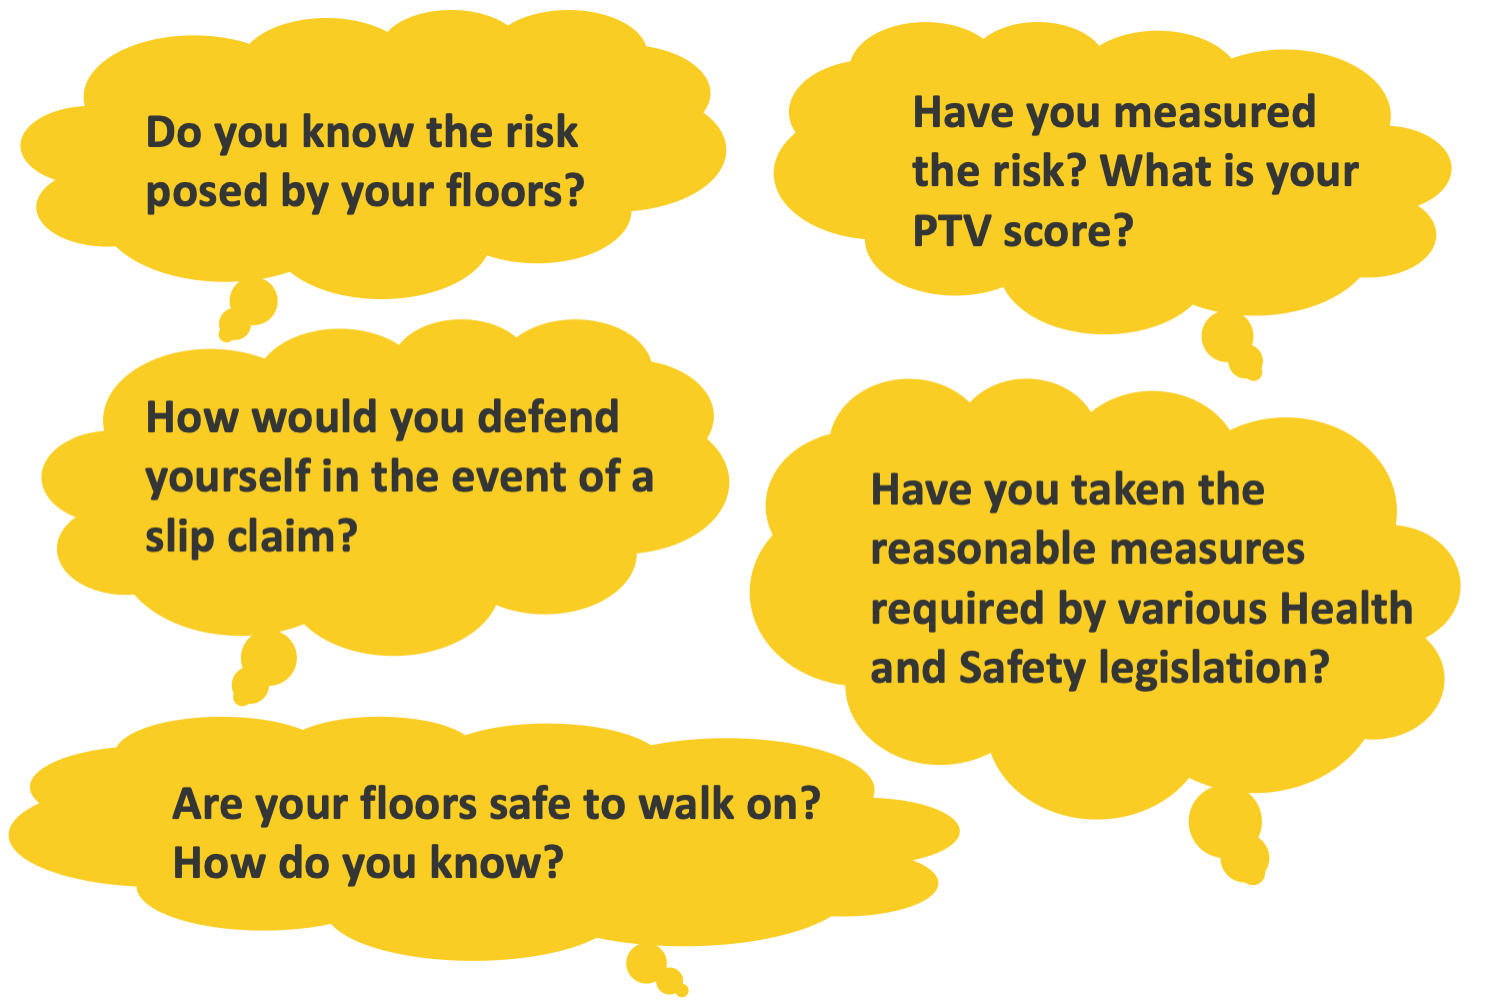 These are questions to ask, to check your understanding of the slip risks posed by your floors.